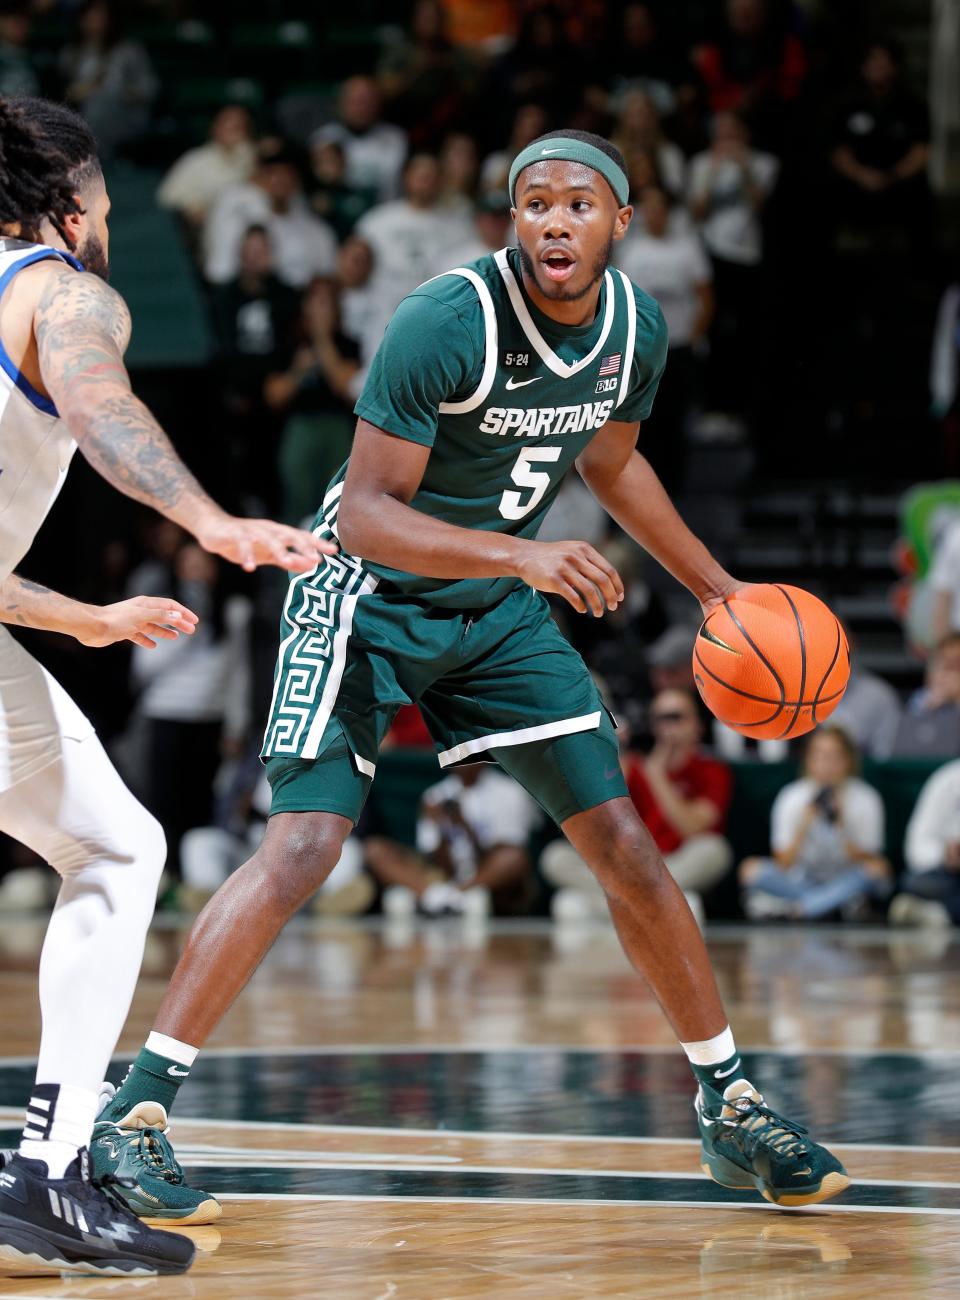 Michigan State's Tre Holloman runs the point against Grand Valley State, Tuesday, Nov. 1, 2022, in East Lansing.